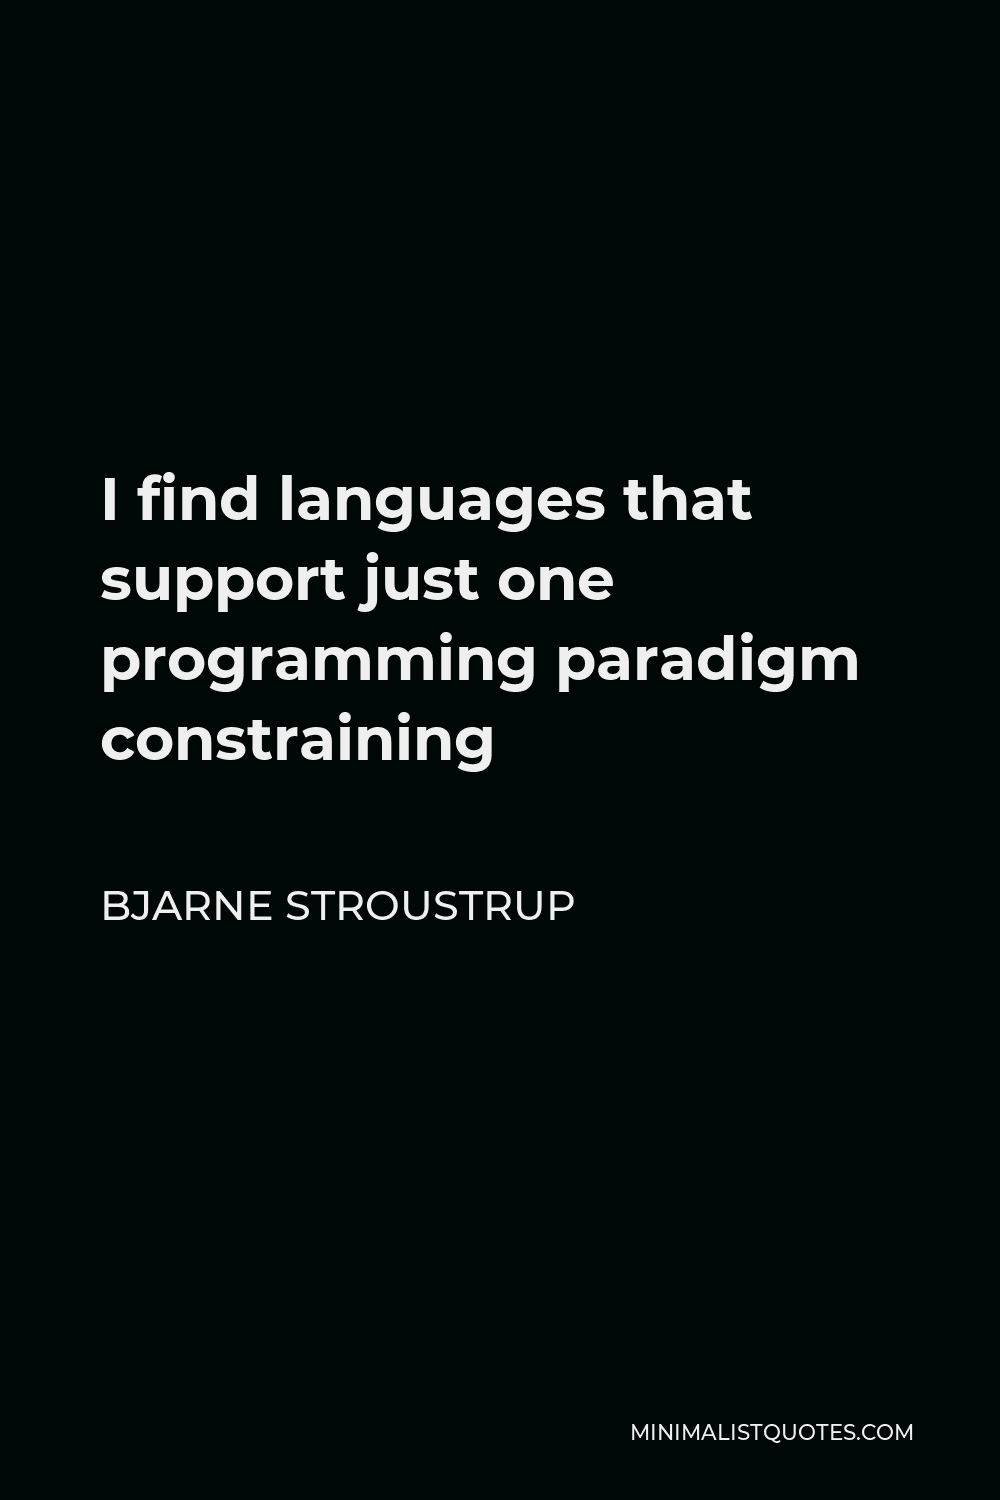 Bjarne Stroustrup Quote - I find languages that support just one programming paradigm constraining